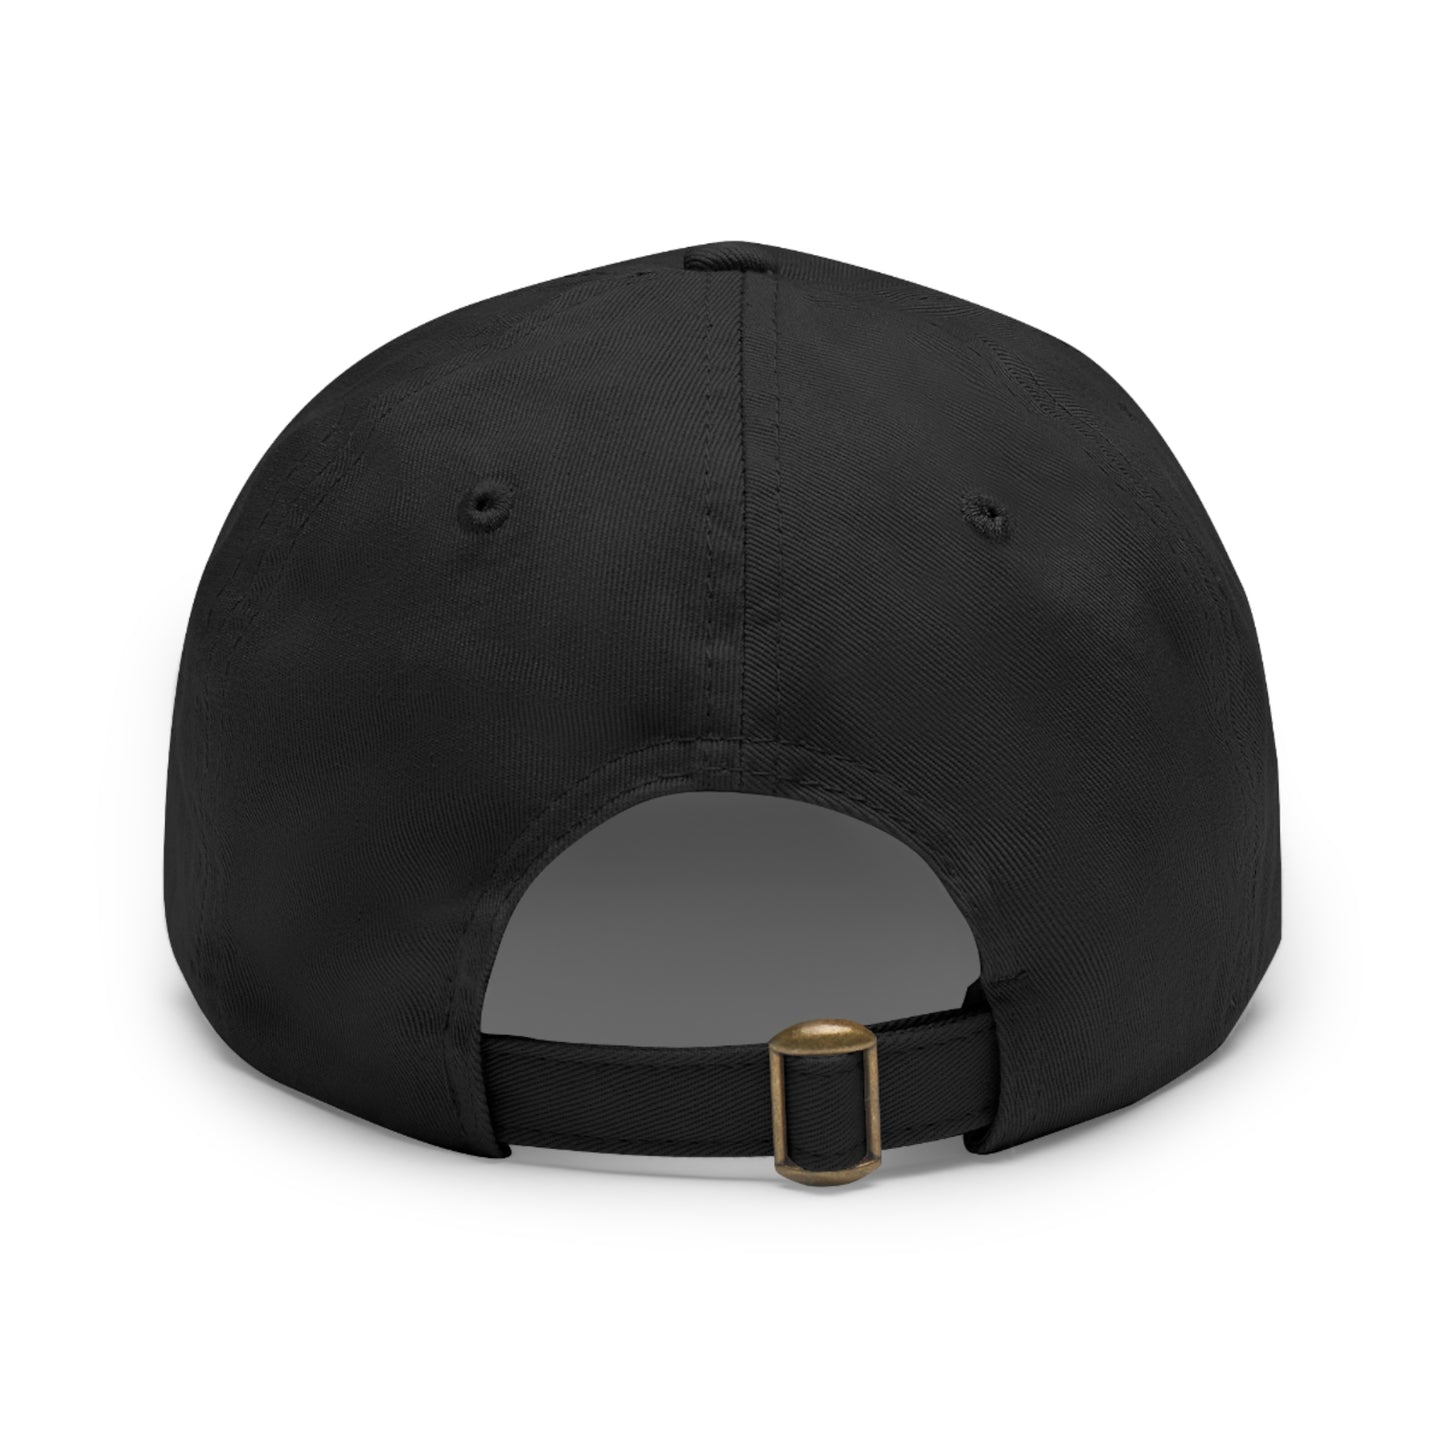 JITD BOLT CROSS HAT WITH LEATHER PATCH